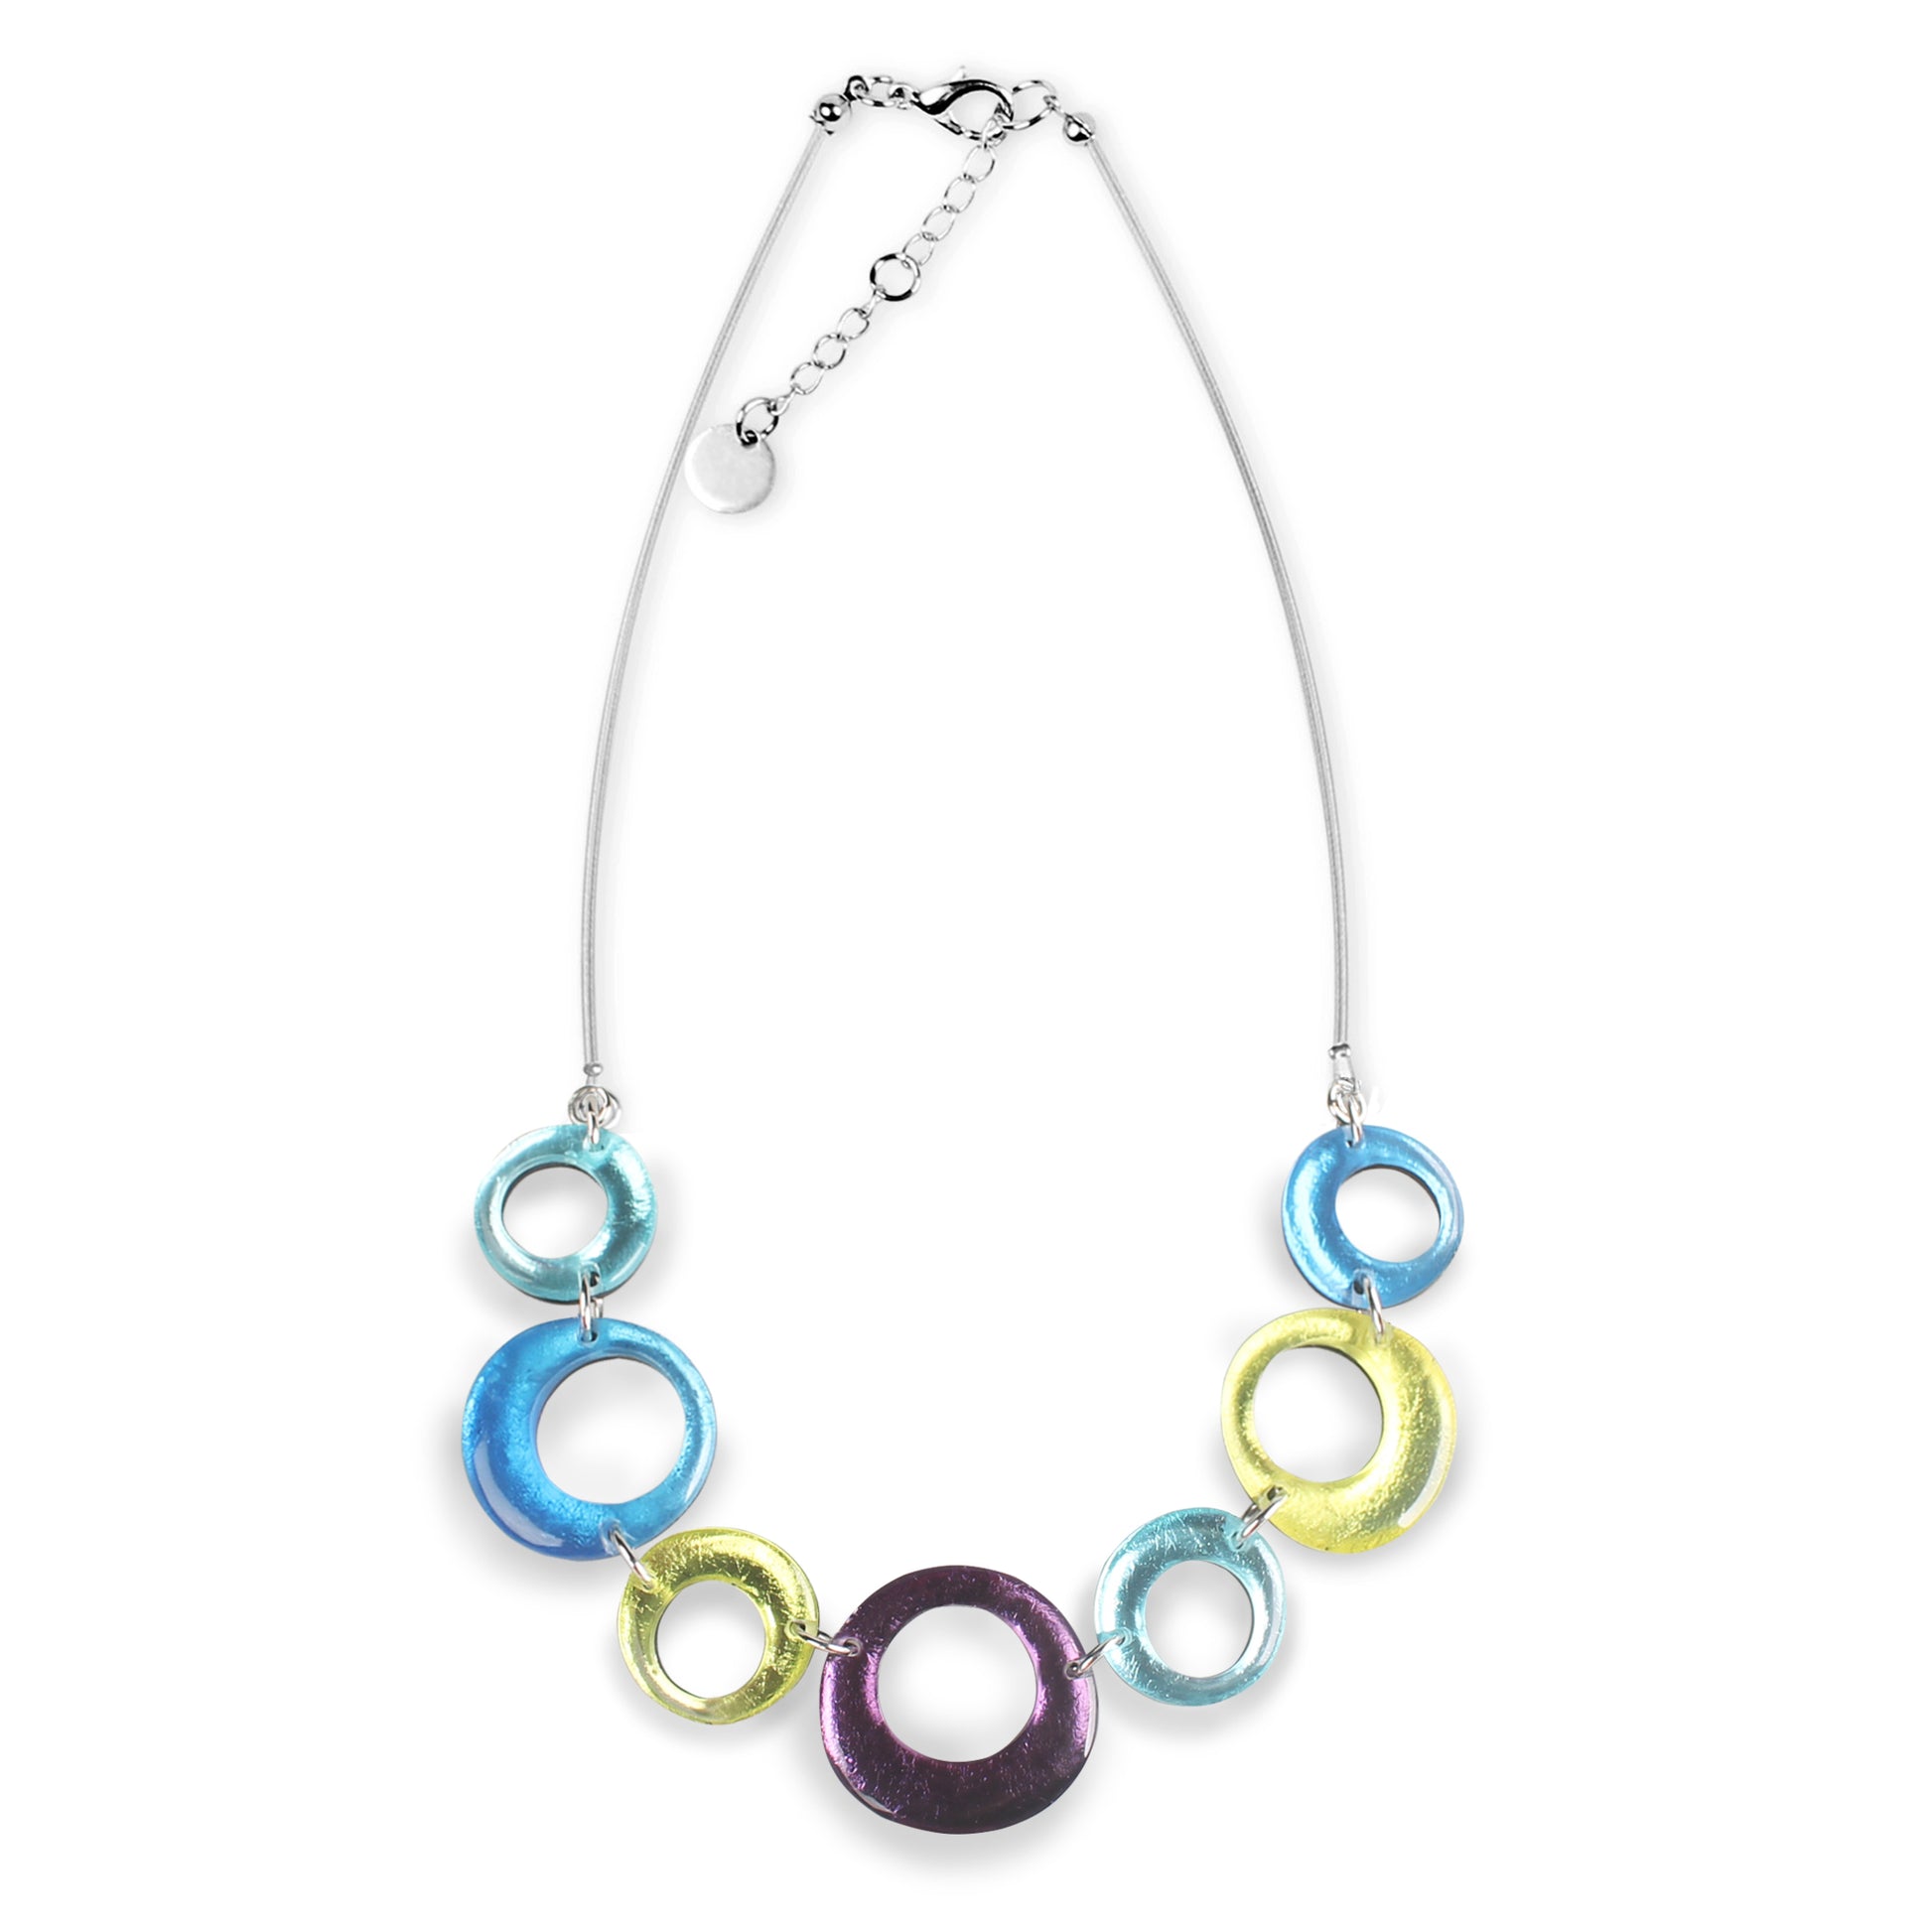 Kingfisher Hollow Circles Necklace